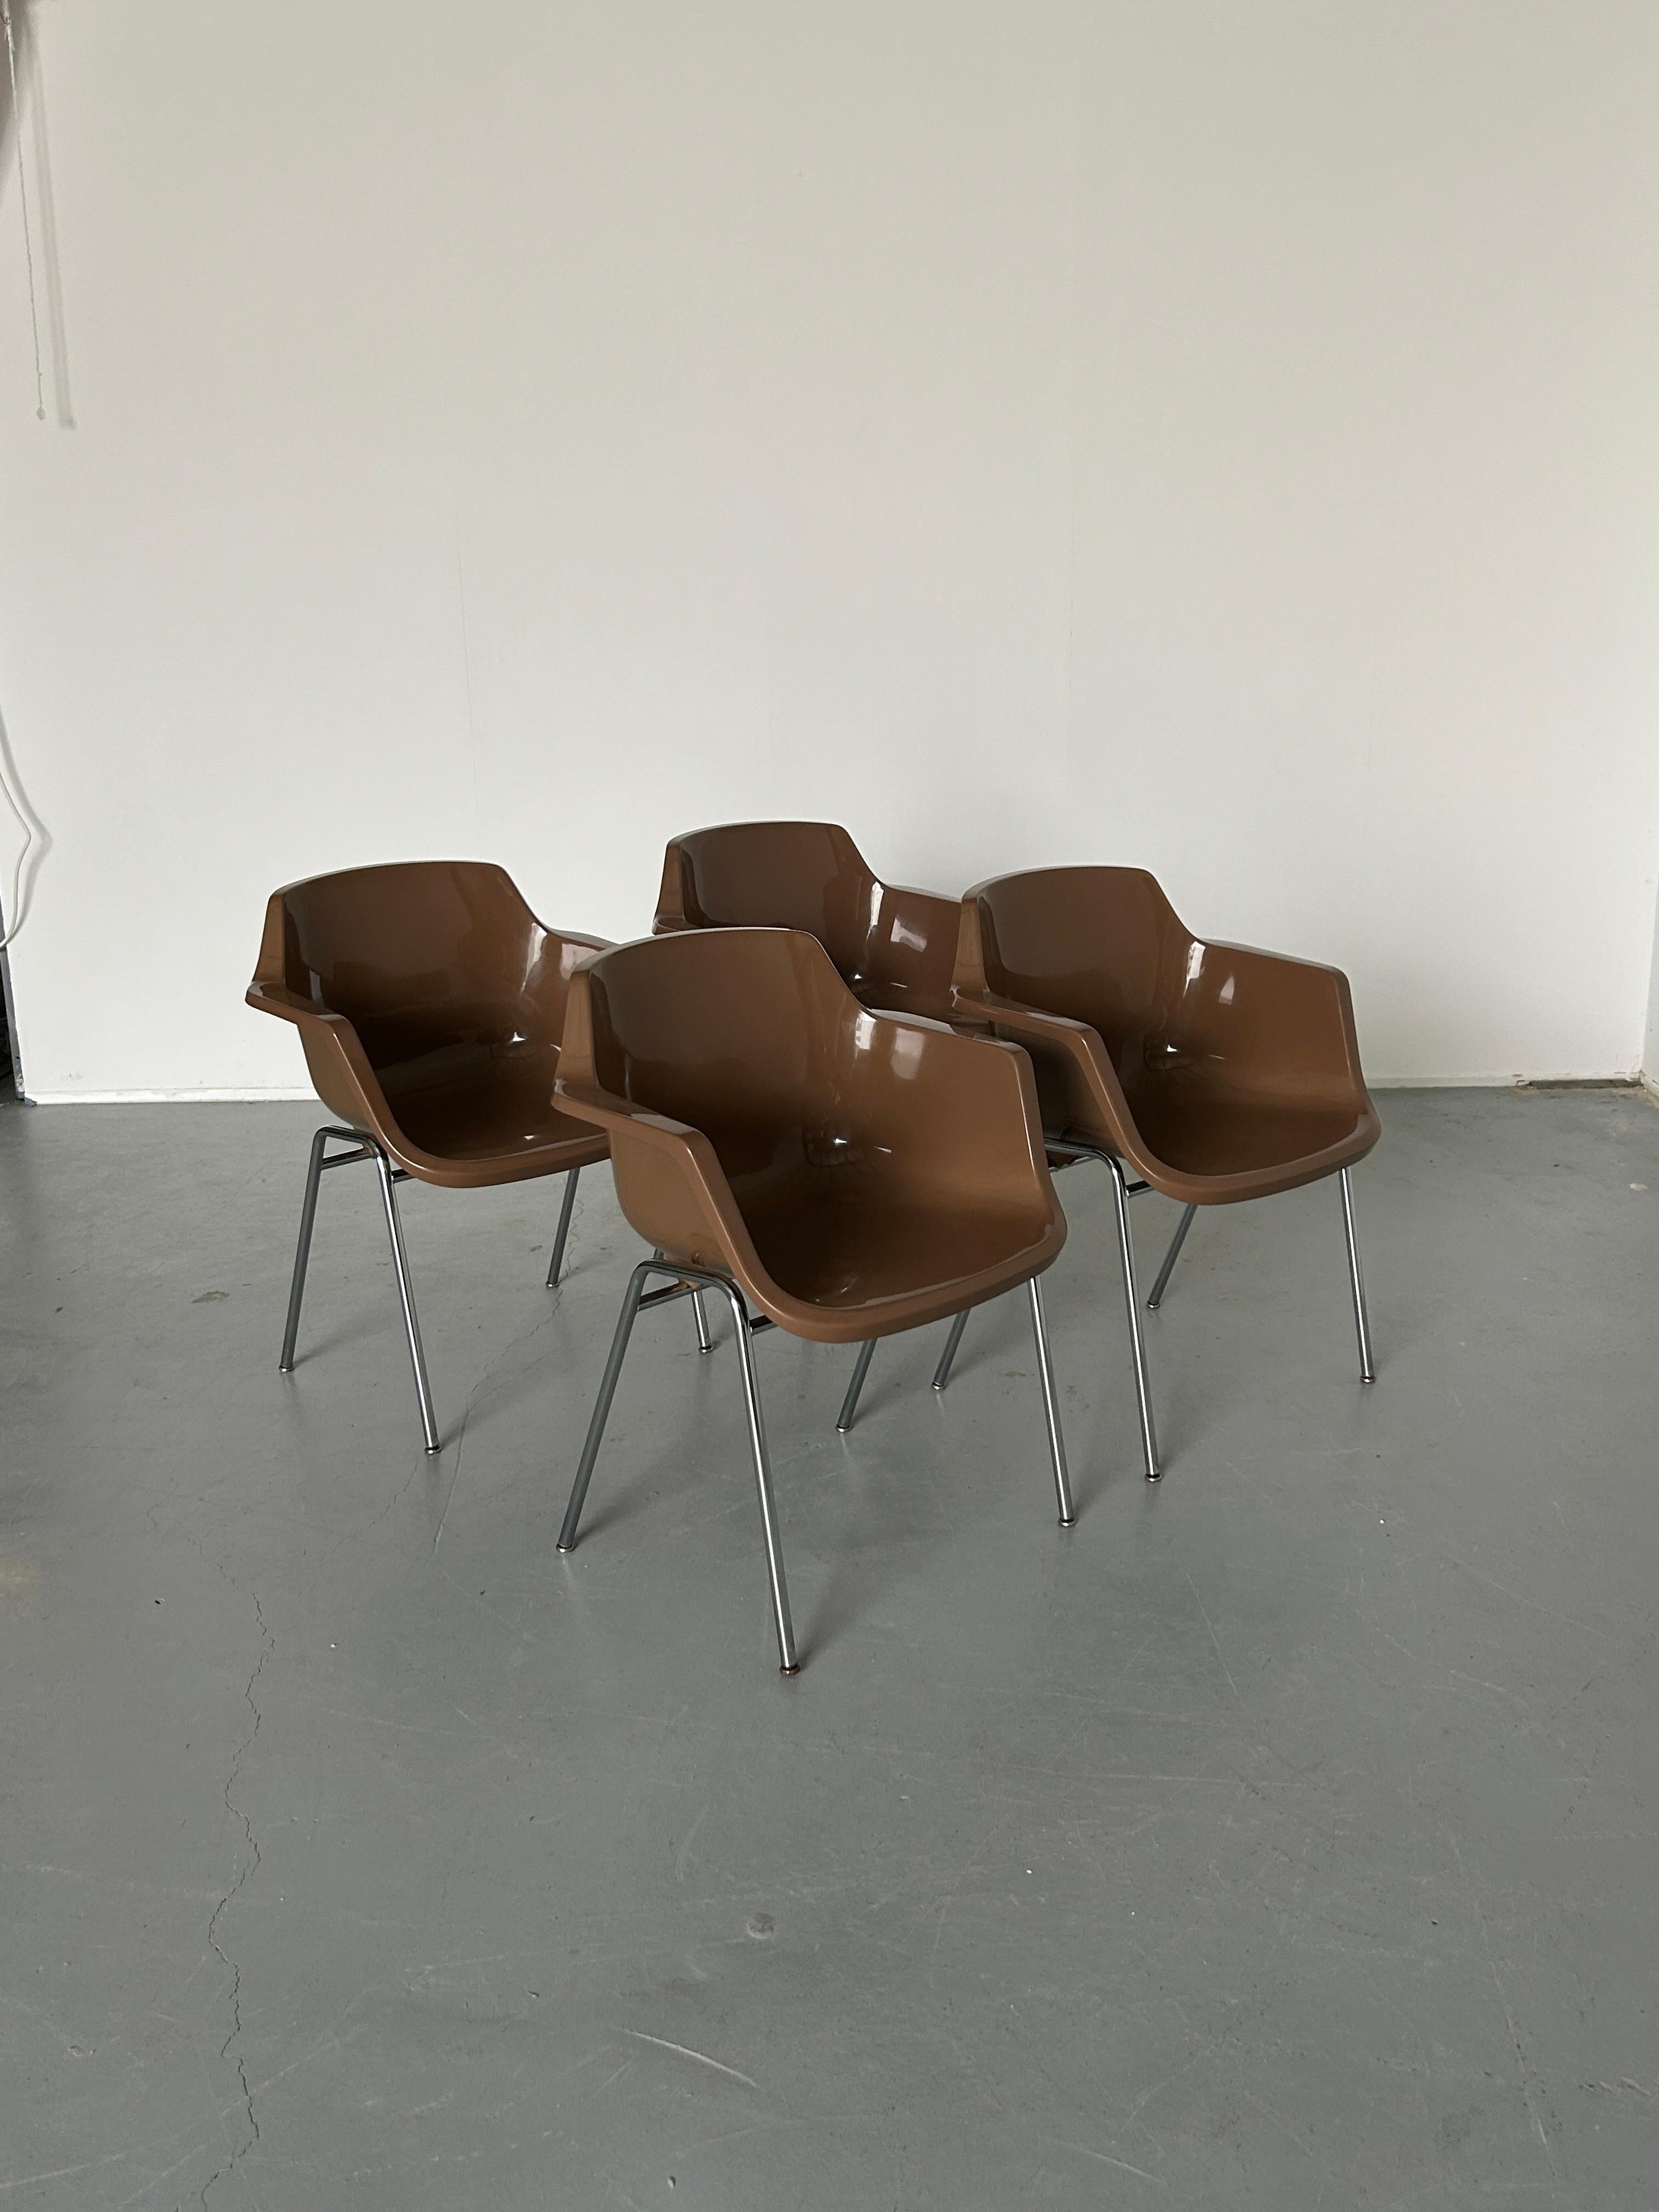 1 of 4 Vintage Mid-Century Shell Plastic Dining Chairs in style of Eames Shell  In Good Condition For Sale In Zagreb, HR